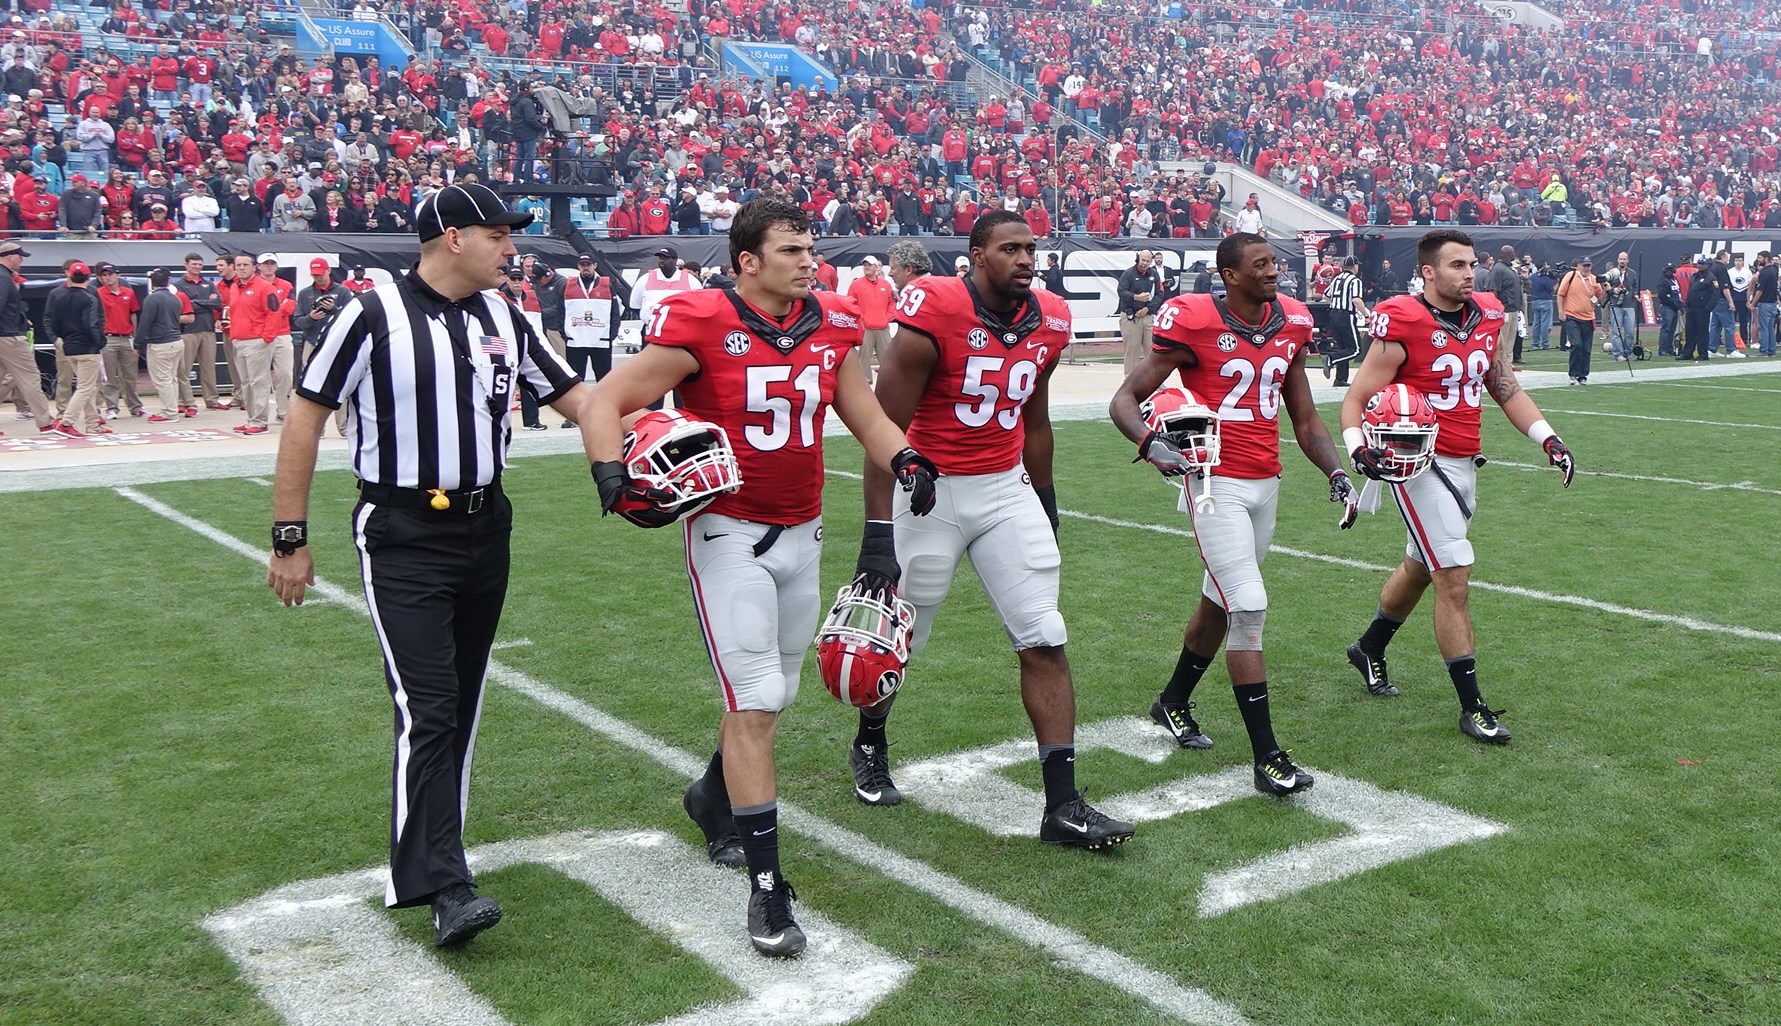 TaxSlayer Bowl  opening ceremonies and coin toss 02-JAN-2016 (Left to right) No.51 Jake Ganus, No. 59 Jordan Jenkins, No.26 Malcolm Mitchell, and No.38 Ryne Rankin (Photo by Greg Poole)